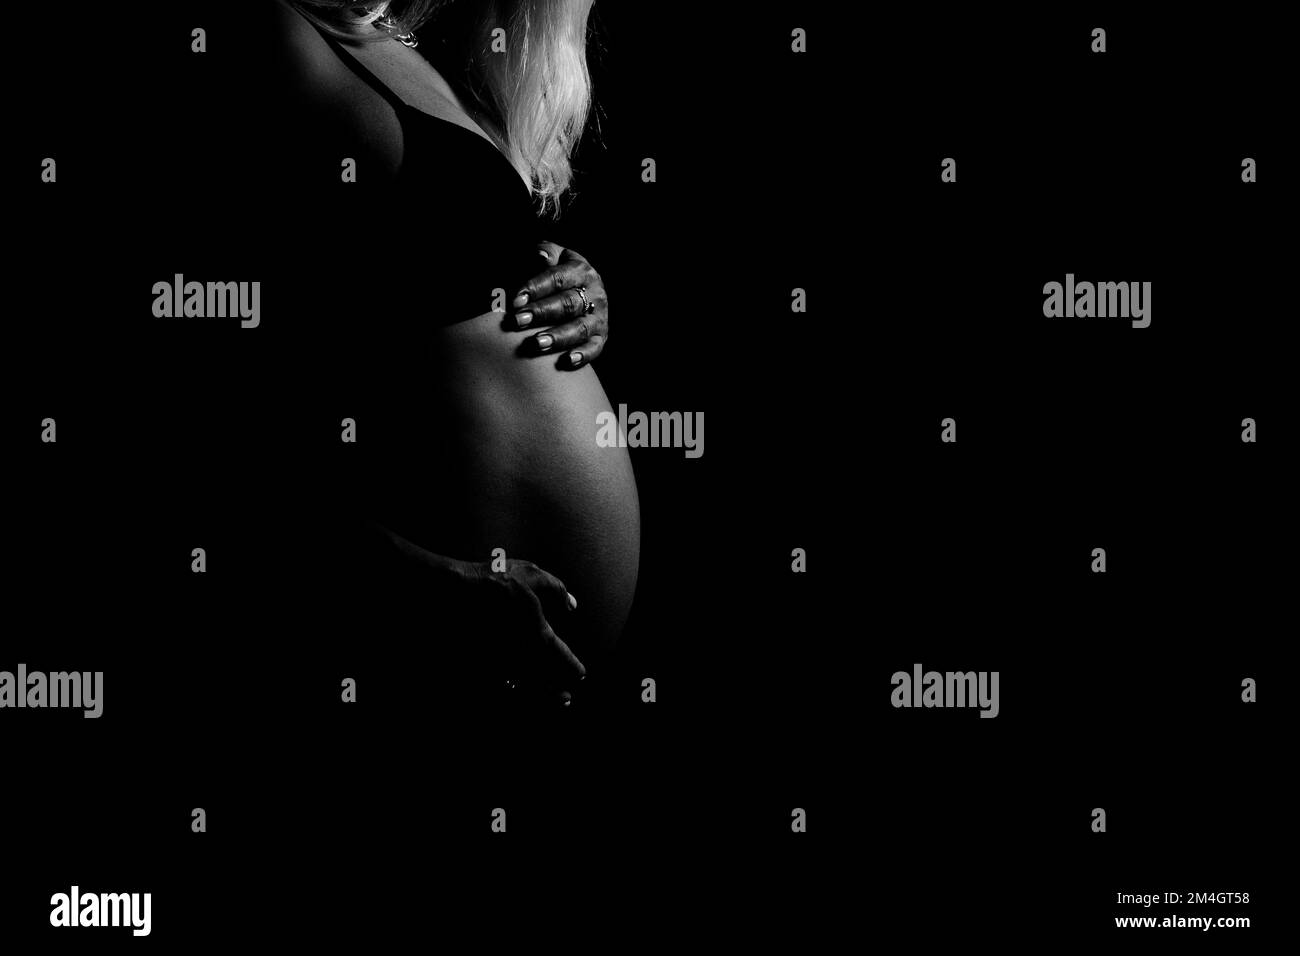 Black and white view of pregnant woman touching her belly. Pregnancy, maternity, preparation and expectation concept. Stock Photo